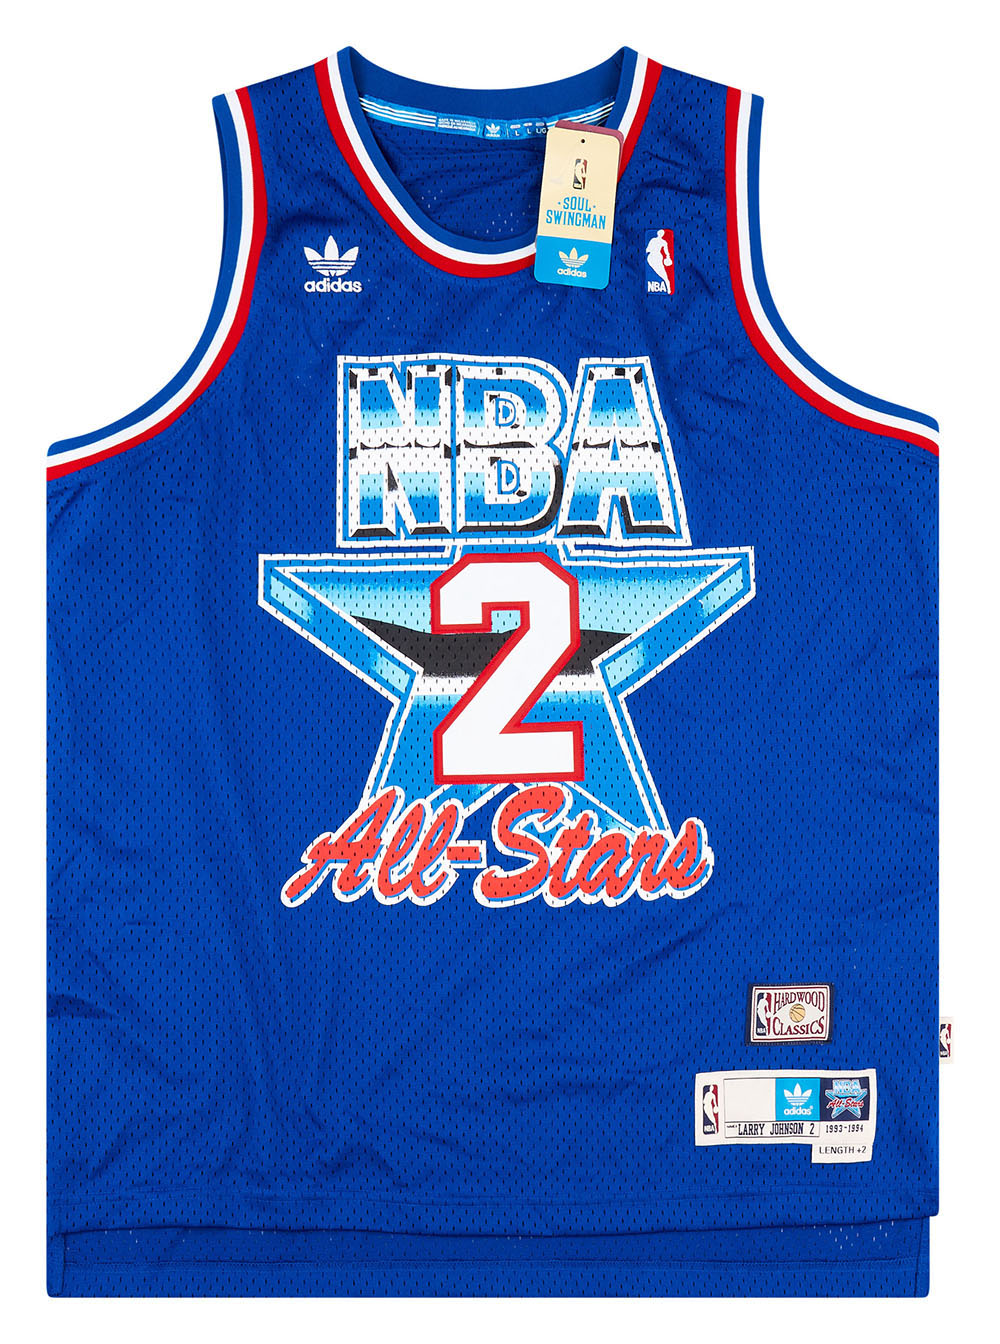 NBA - Get your '90s themed adidas NBA Hardwood Classics jerseys, as worn on  court by select NBA teams this month!  And be sure  to watch the Miami Heat and Chicago